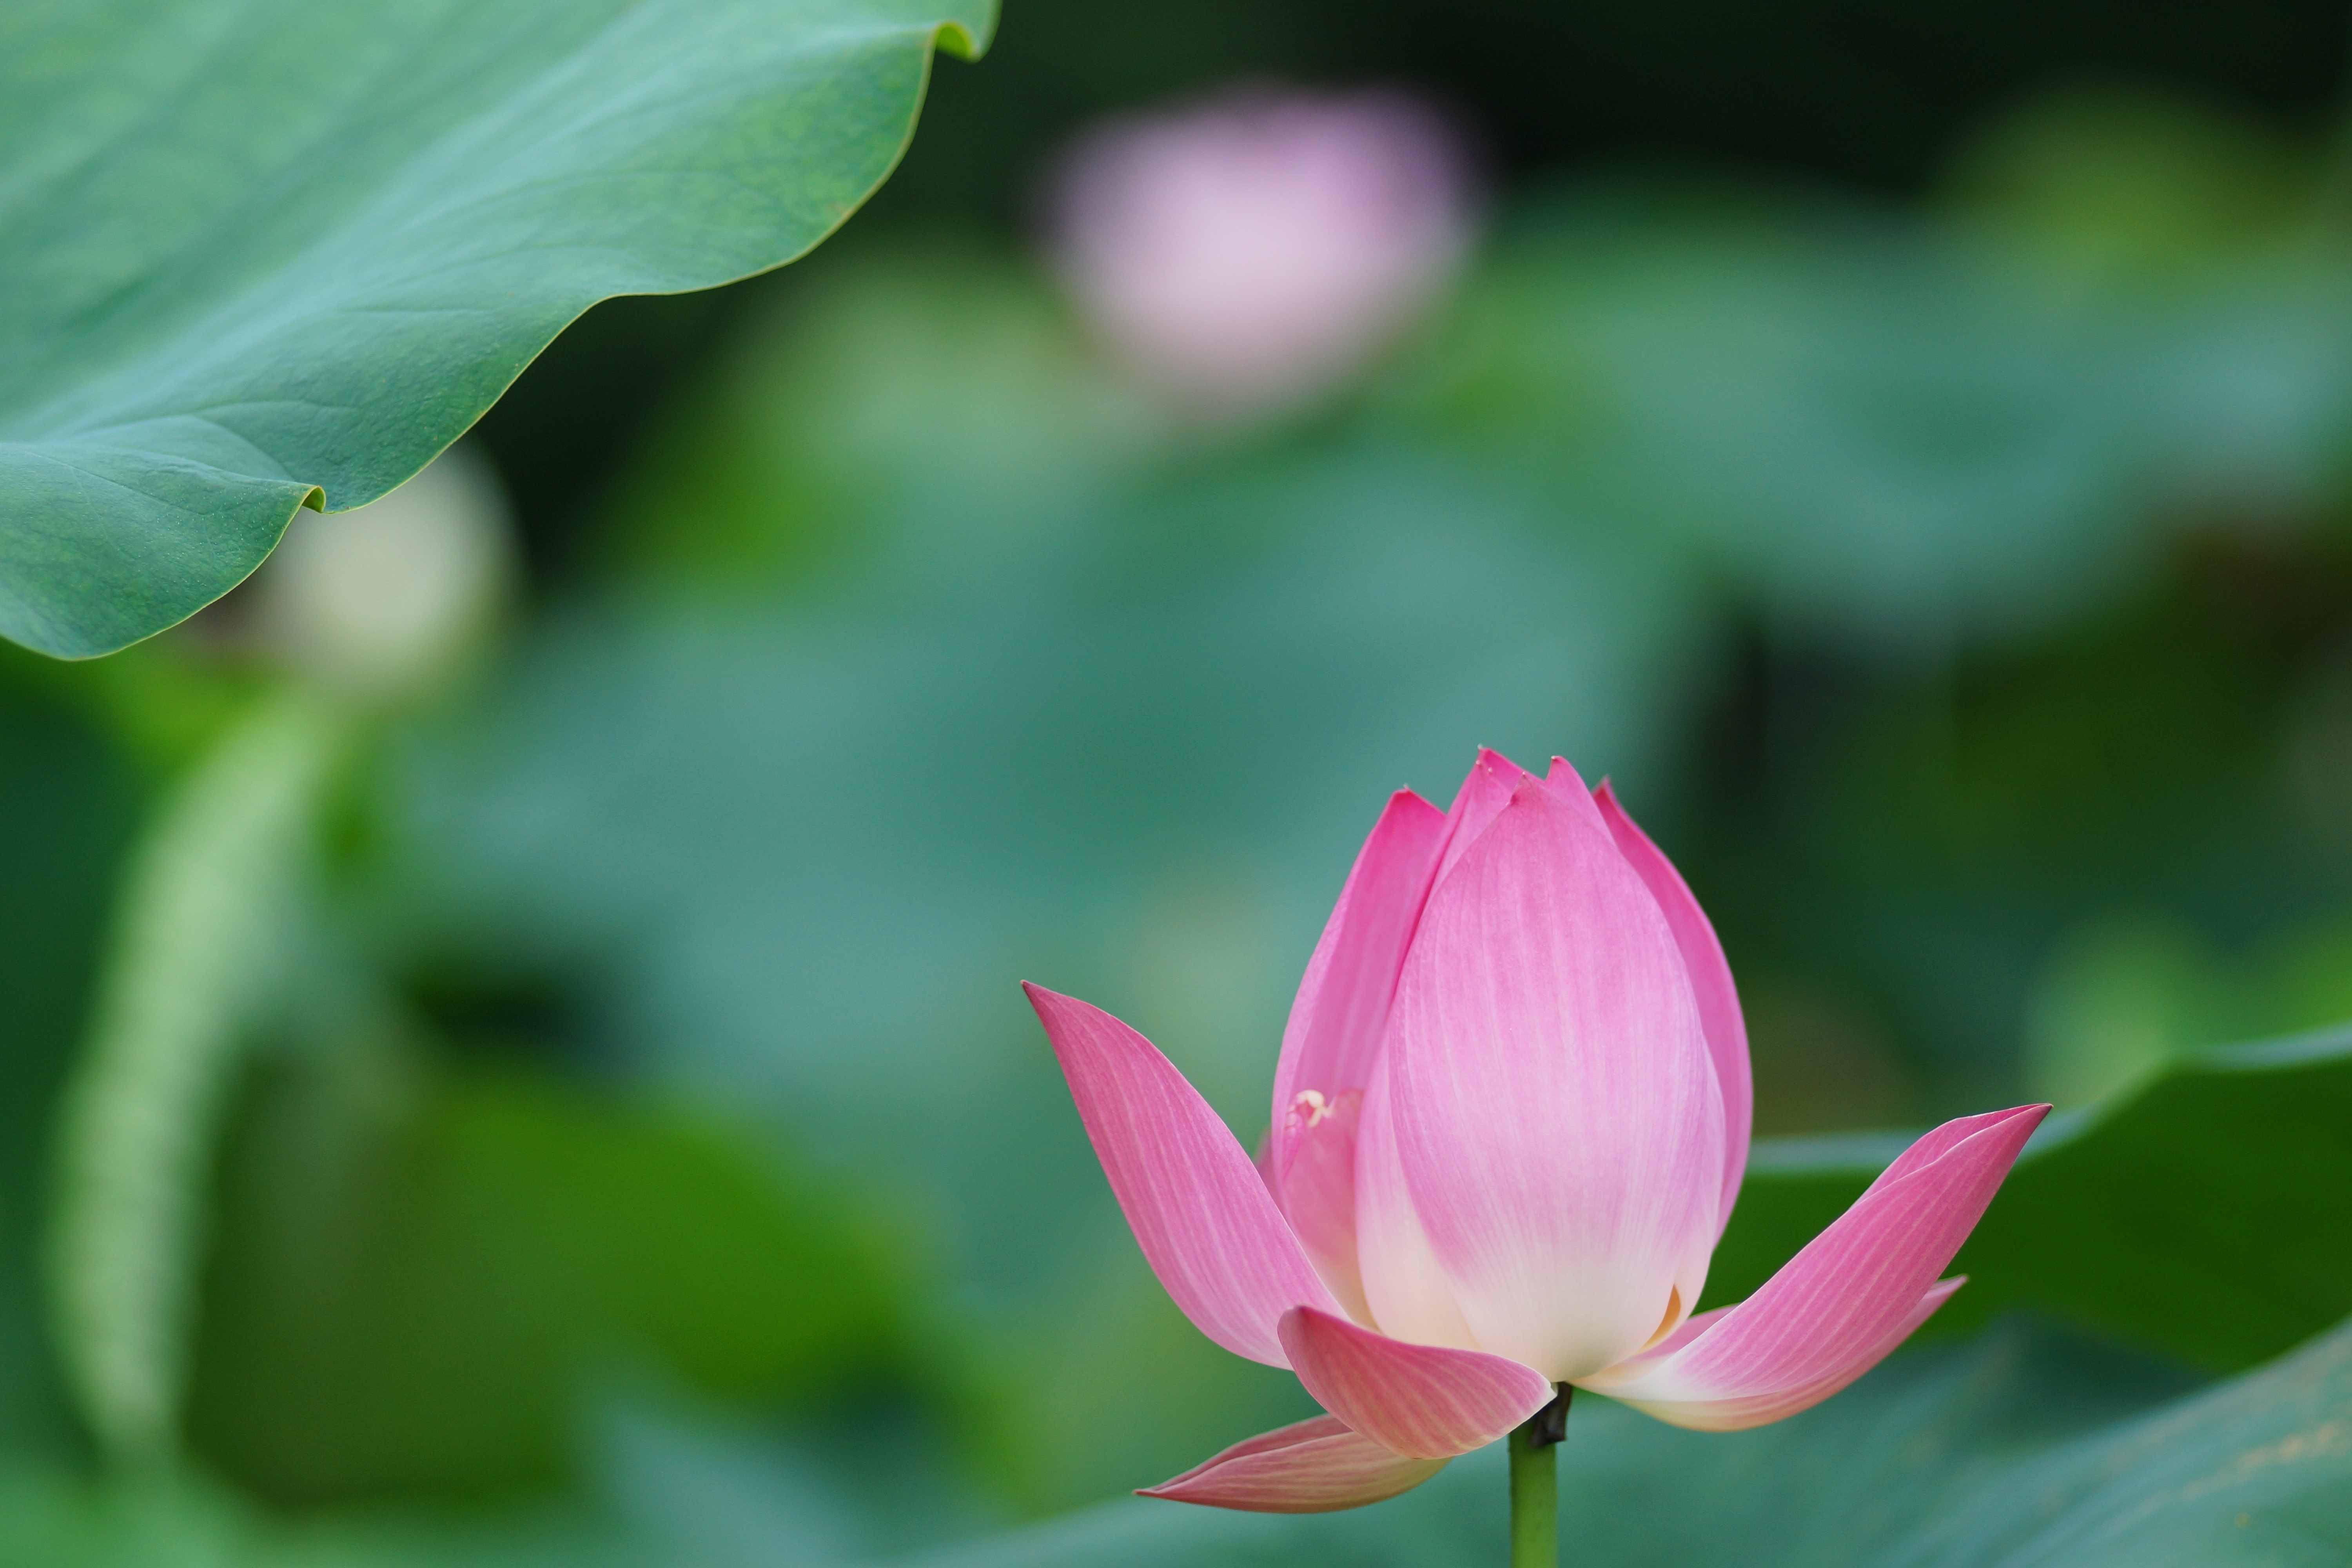 Lotus Flower Wallpapers, Pictures, Images